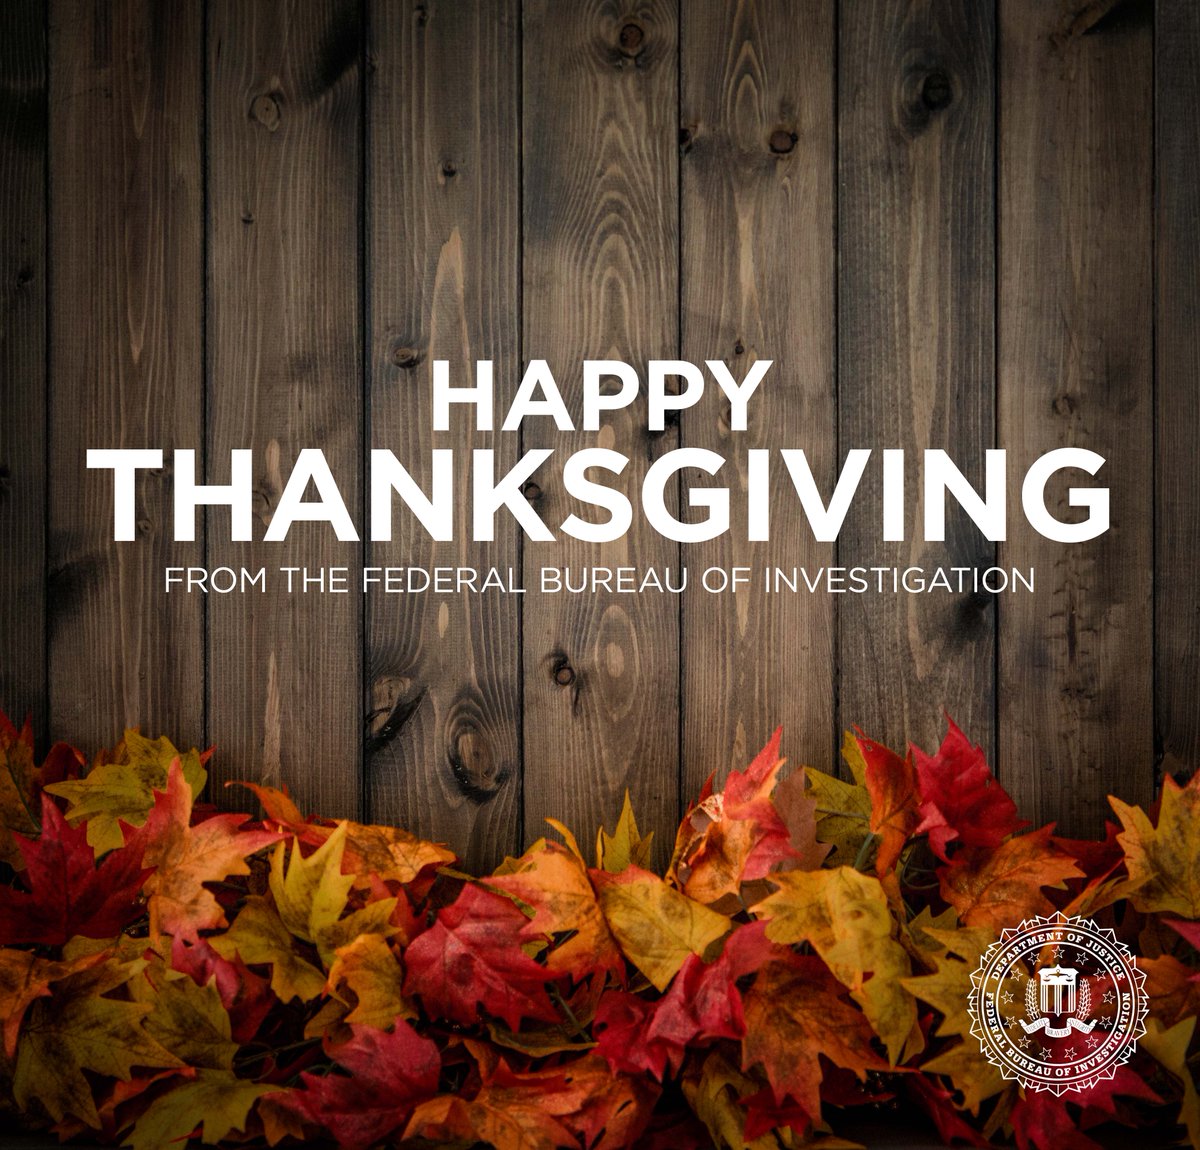 The #FBI wishes you and your family a Happy Thanksgiving.